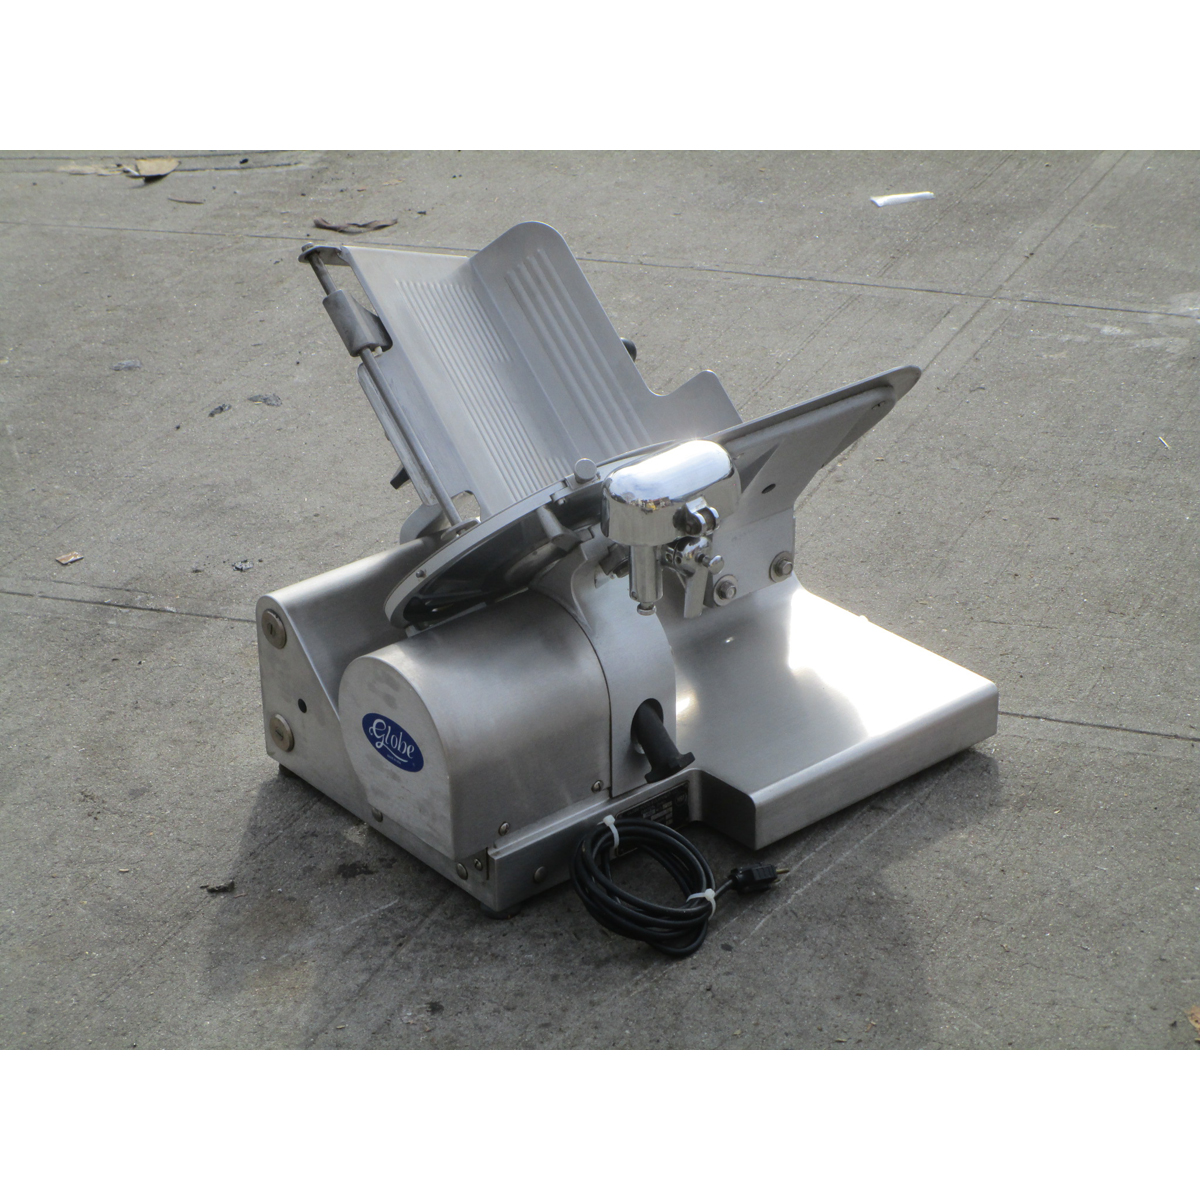 Globe 3500 Meat Slicer, Used Very Good Condition image 1